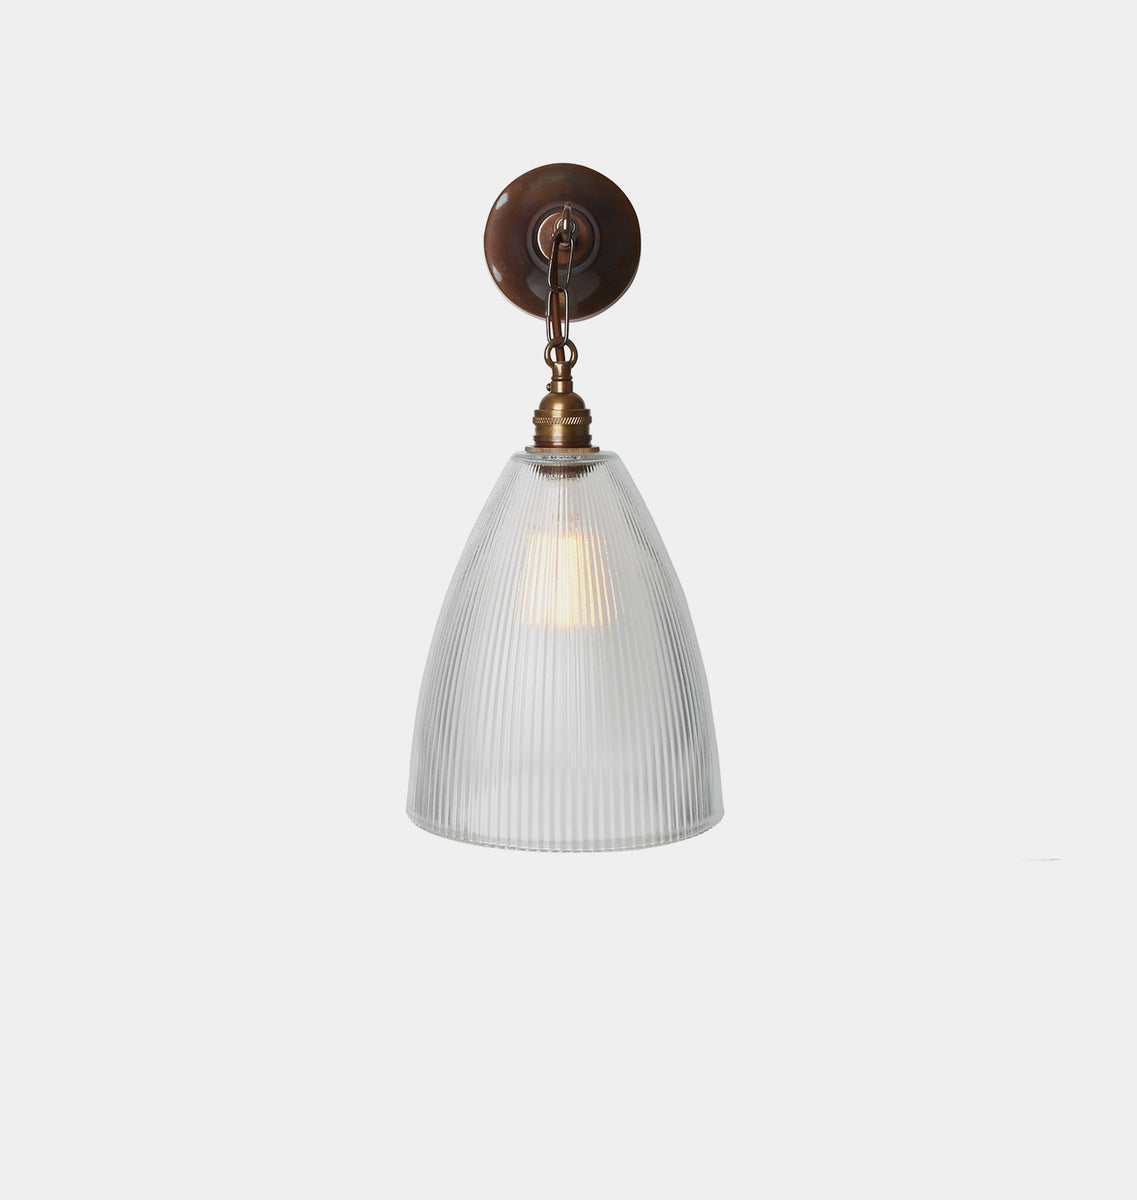 Wall lamp (Sconce) COOLIE by Mullan Lighting